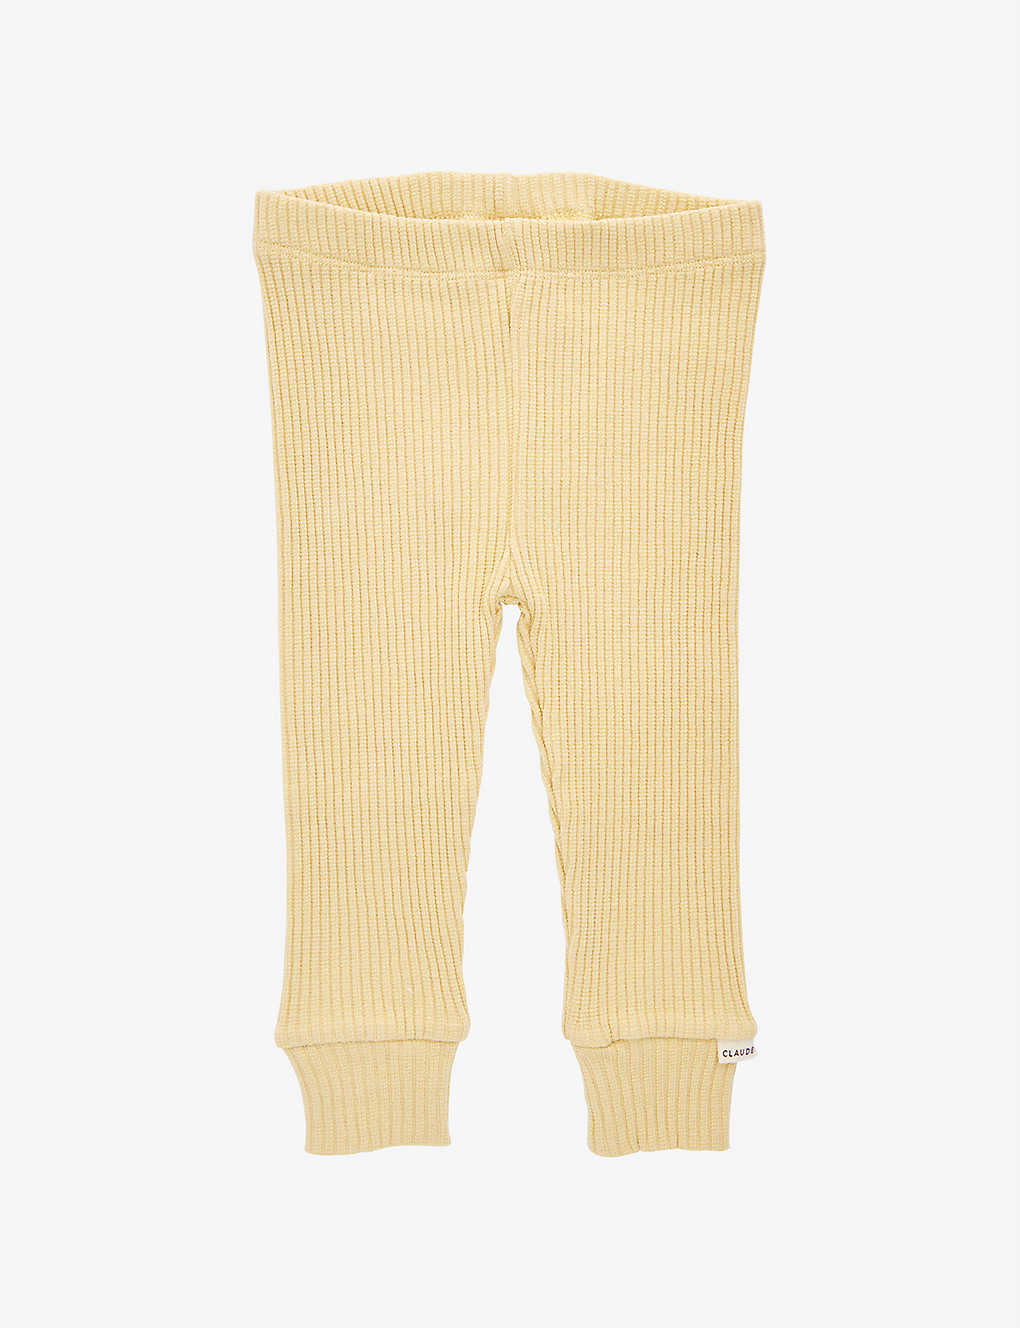 Claude & Co. Babies' Buttercup Ribbed Organic Cotton-blend Leggings 0-12 Months In Vanilla